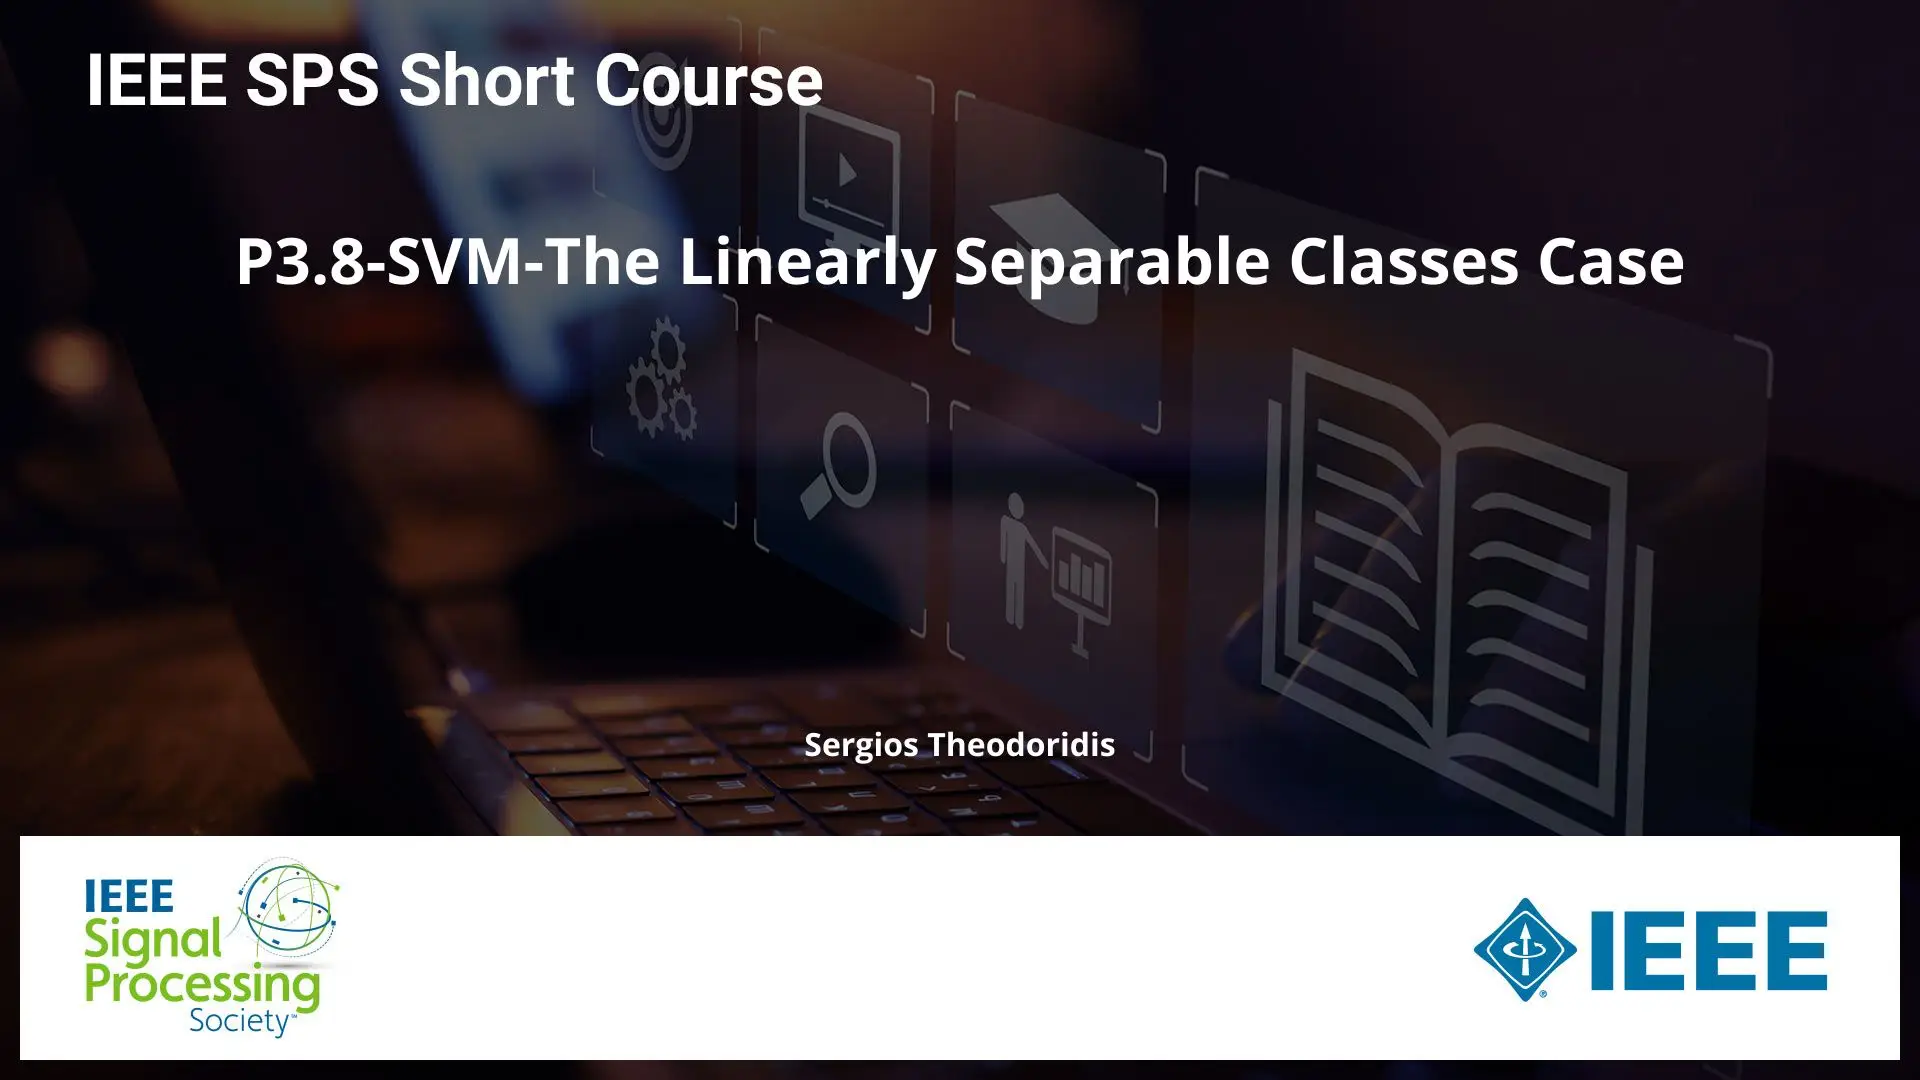 P3.8-SVM-The Linearly Separable Classes Case